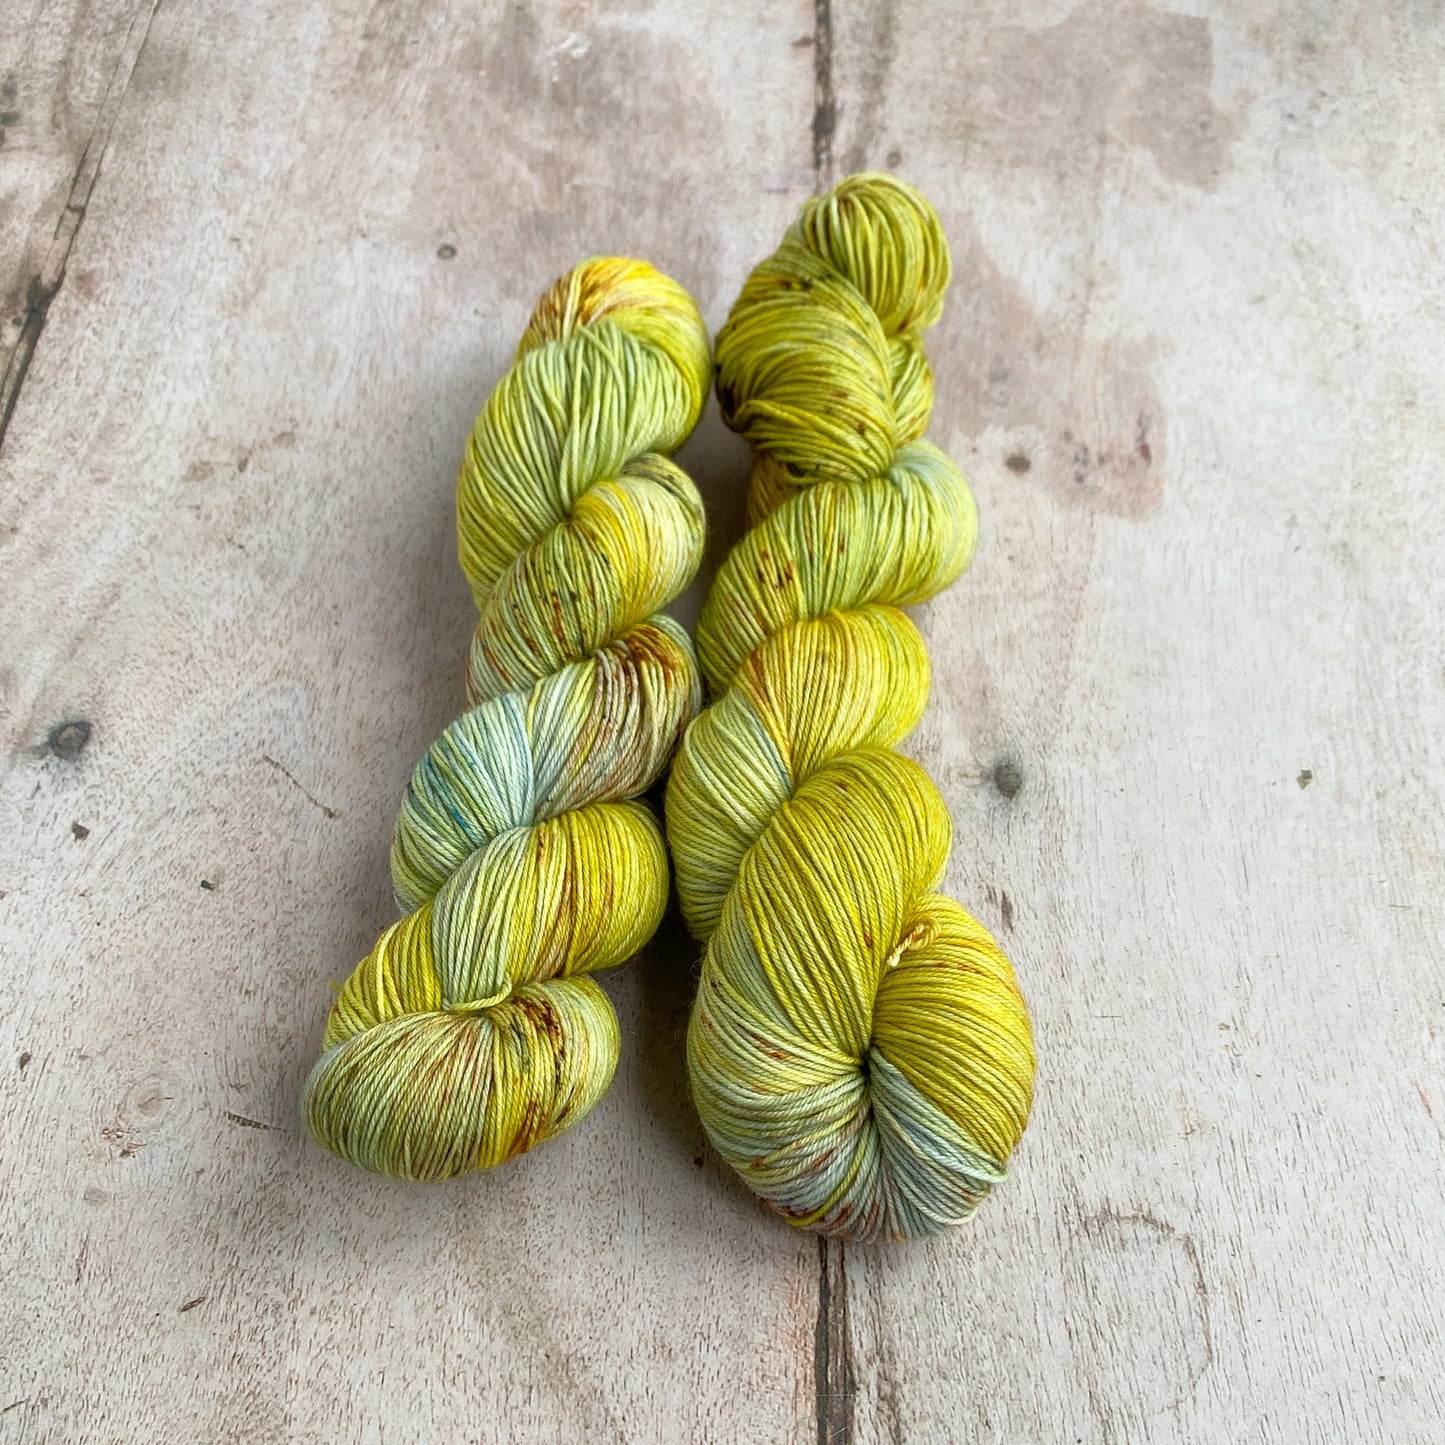 Two skeins of golden green and light blue hand dyed yarn sit together on a wooden table. 